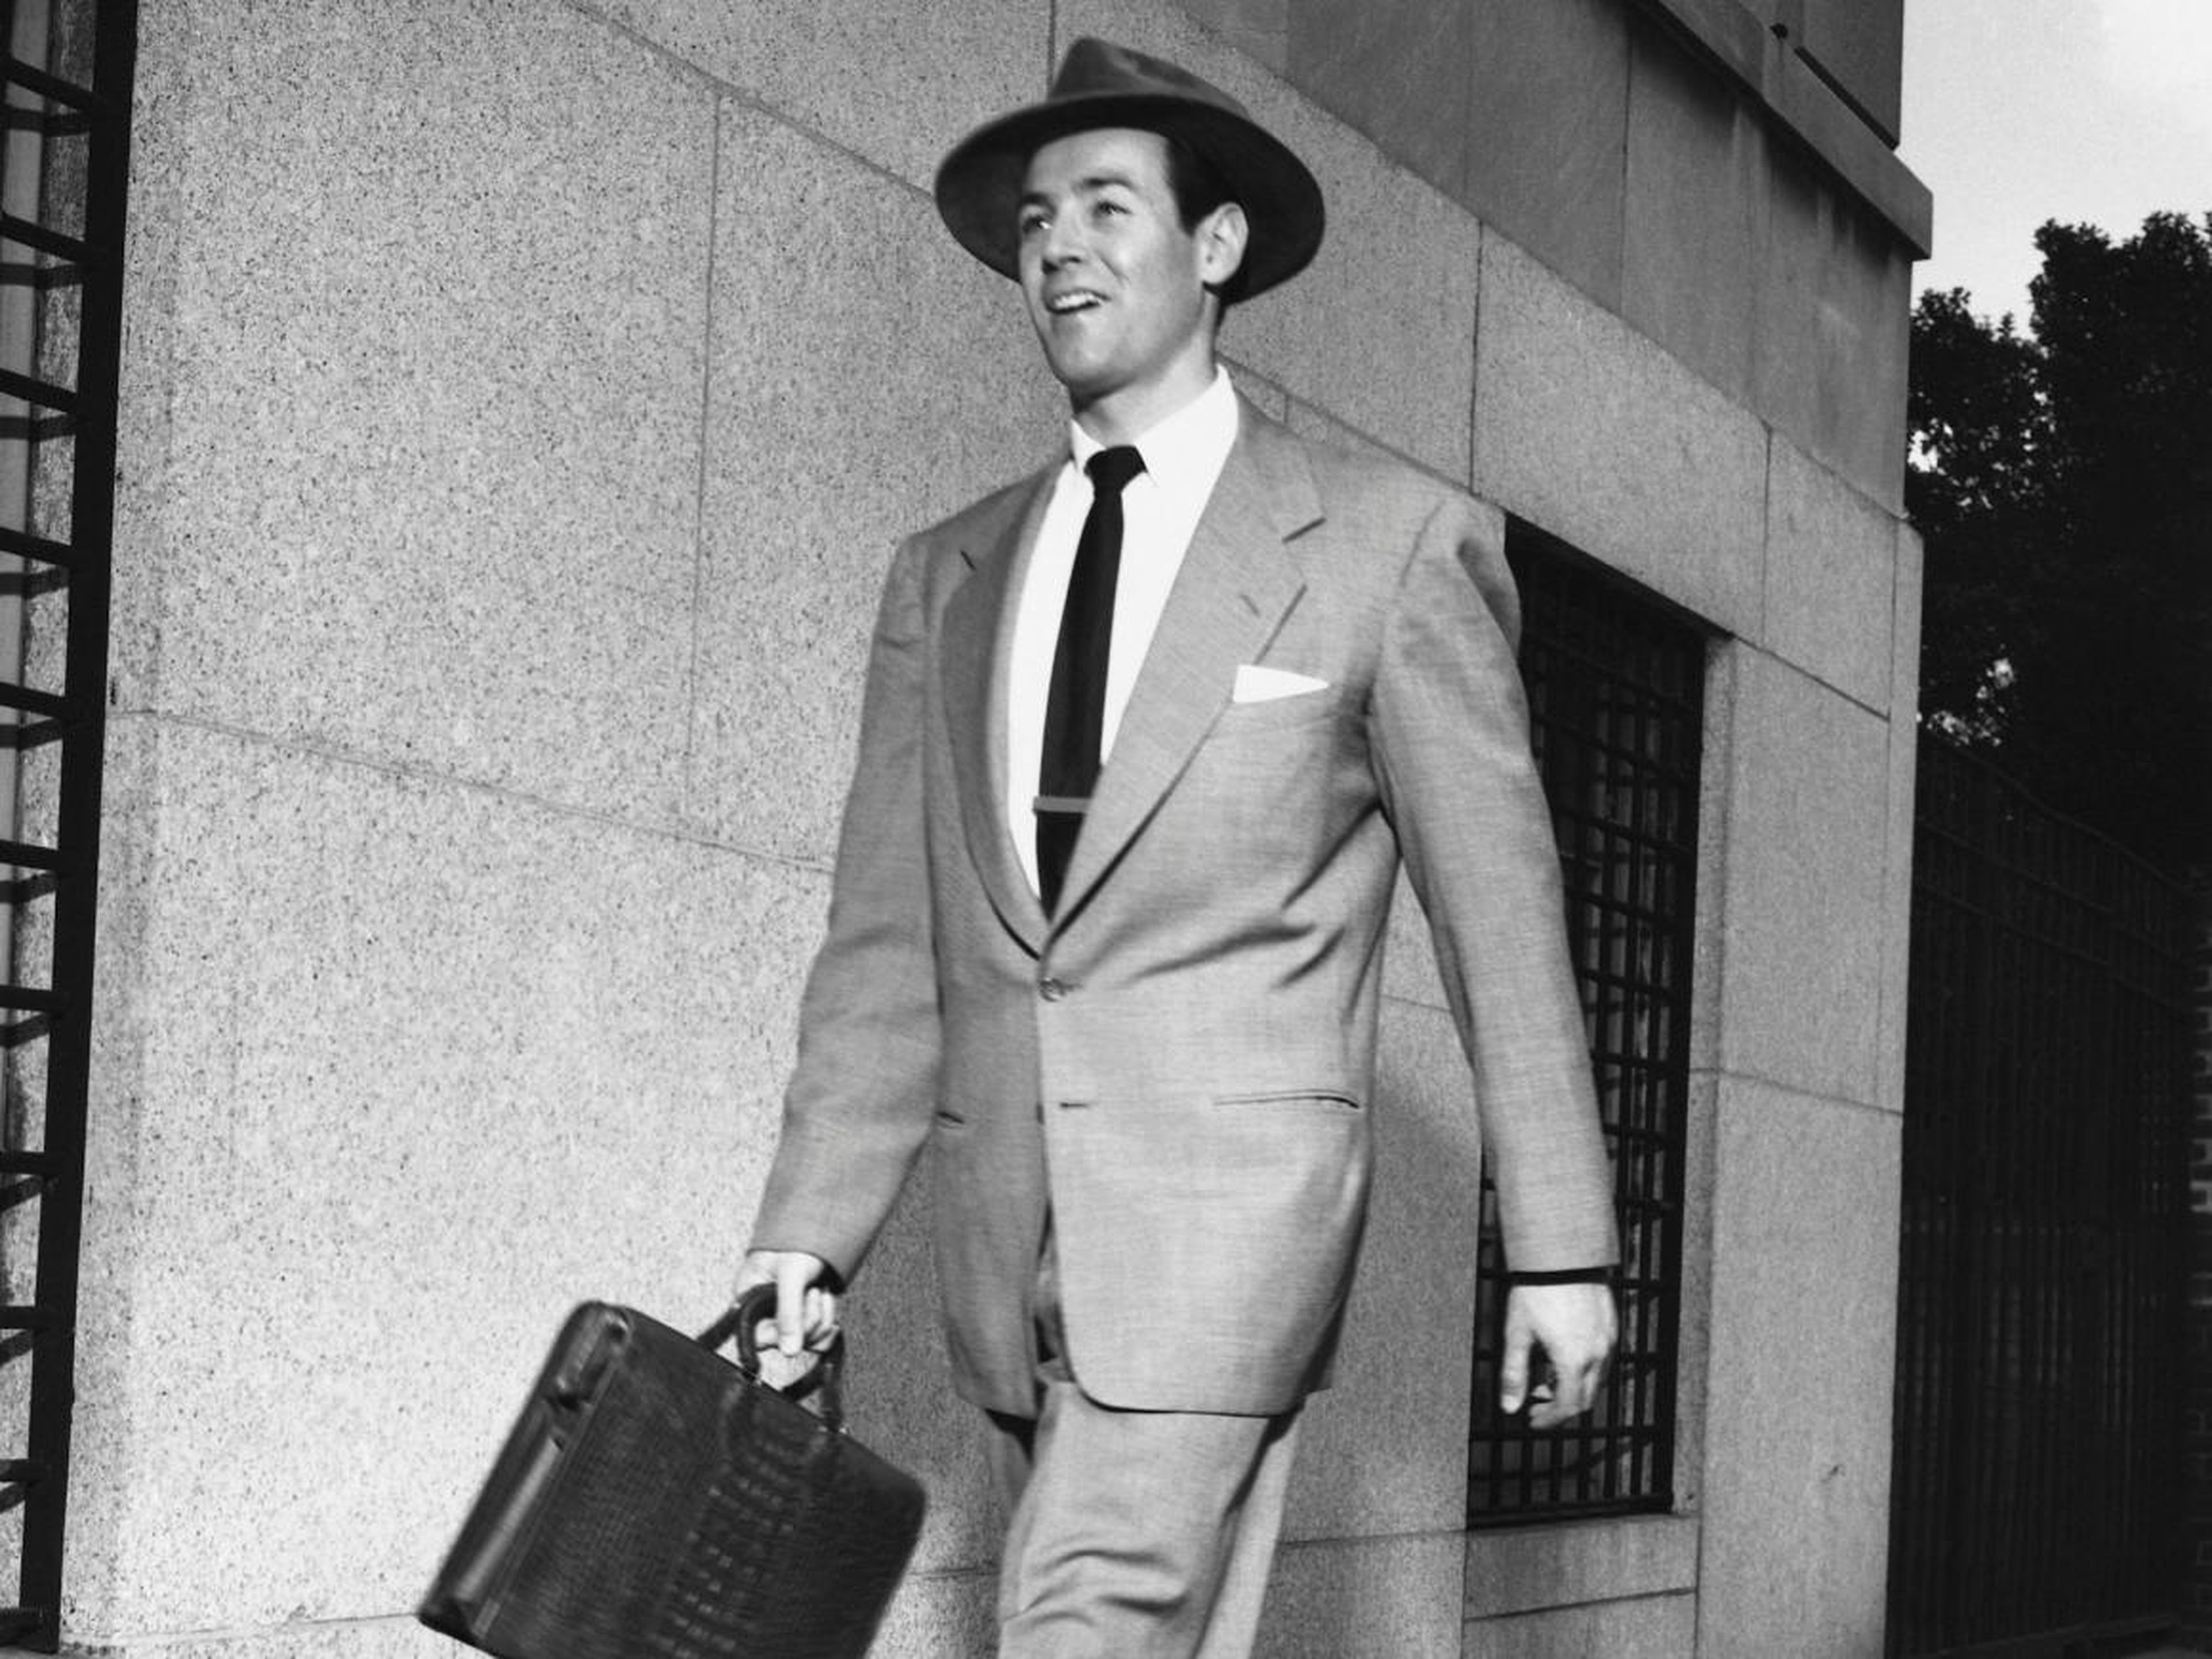 Generally speaking, men sported suits, ties, and overcoats. "Dark suits, white shirts, dark ties, and white pocket squares didn't just dominate — they were practically a requirement in business," according to GQ.